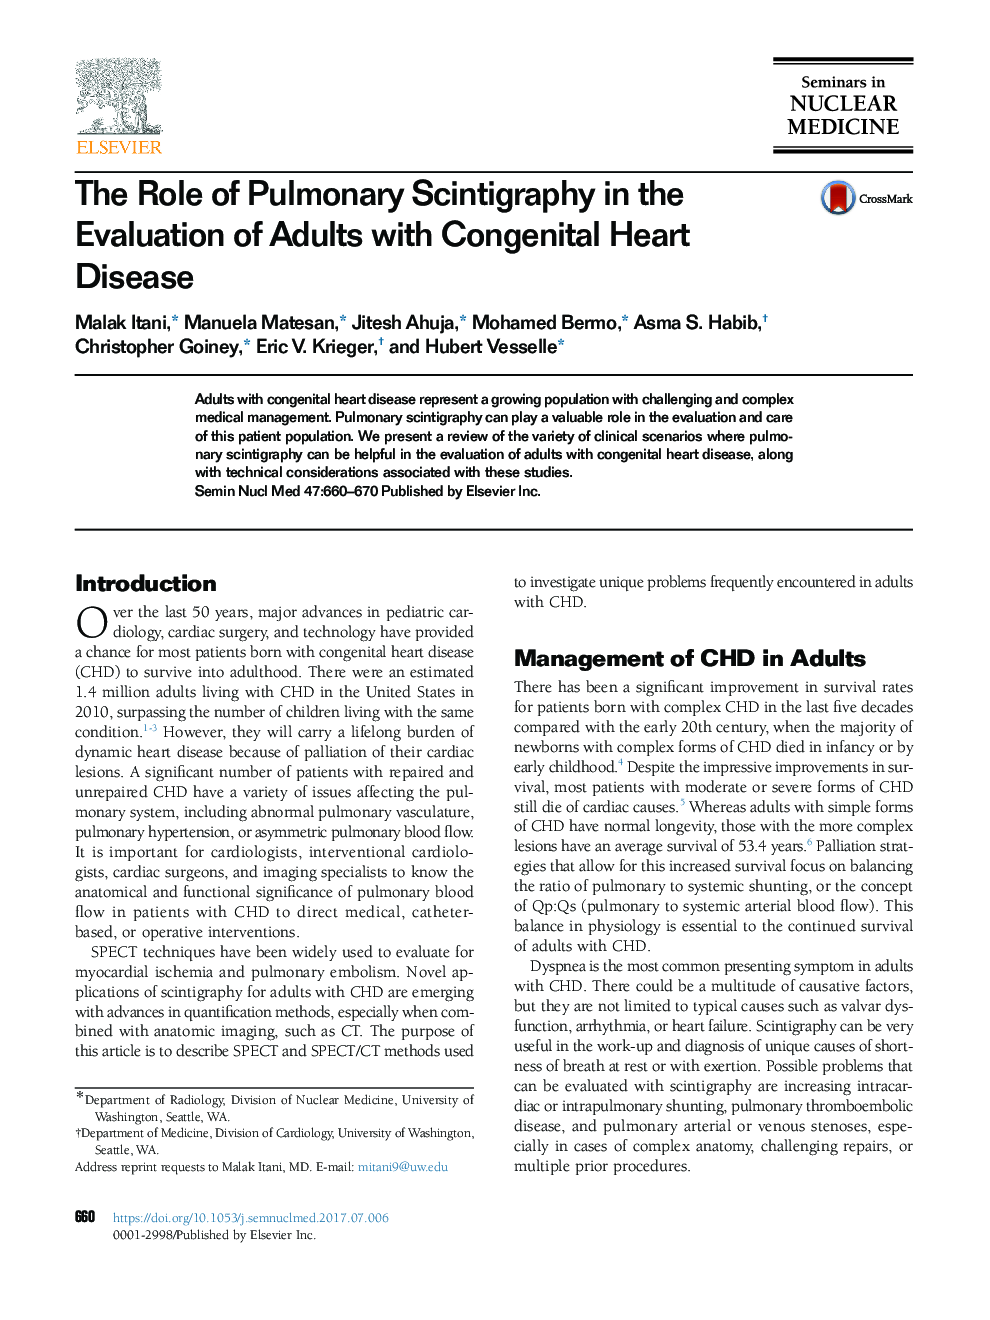 The Role of Pulmonary Scintigraphy in the Evaluation of Adults with Congenital Heart Disease